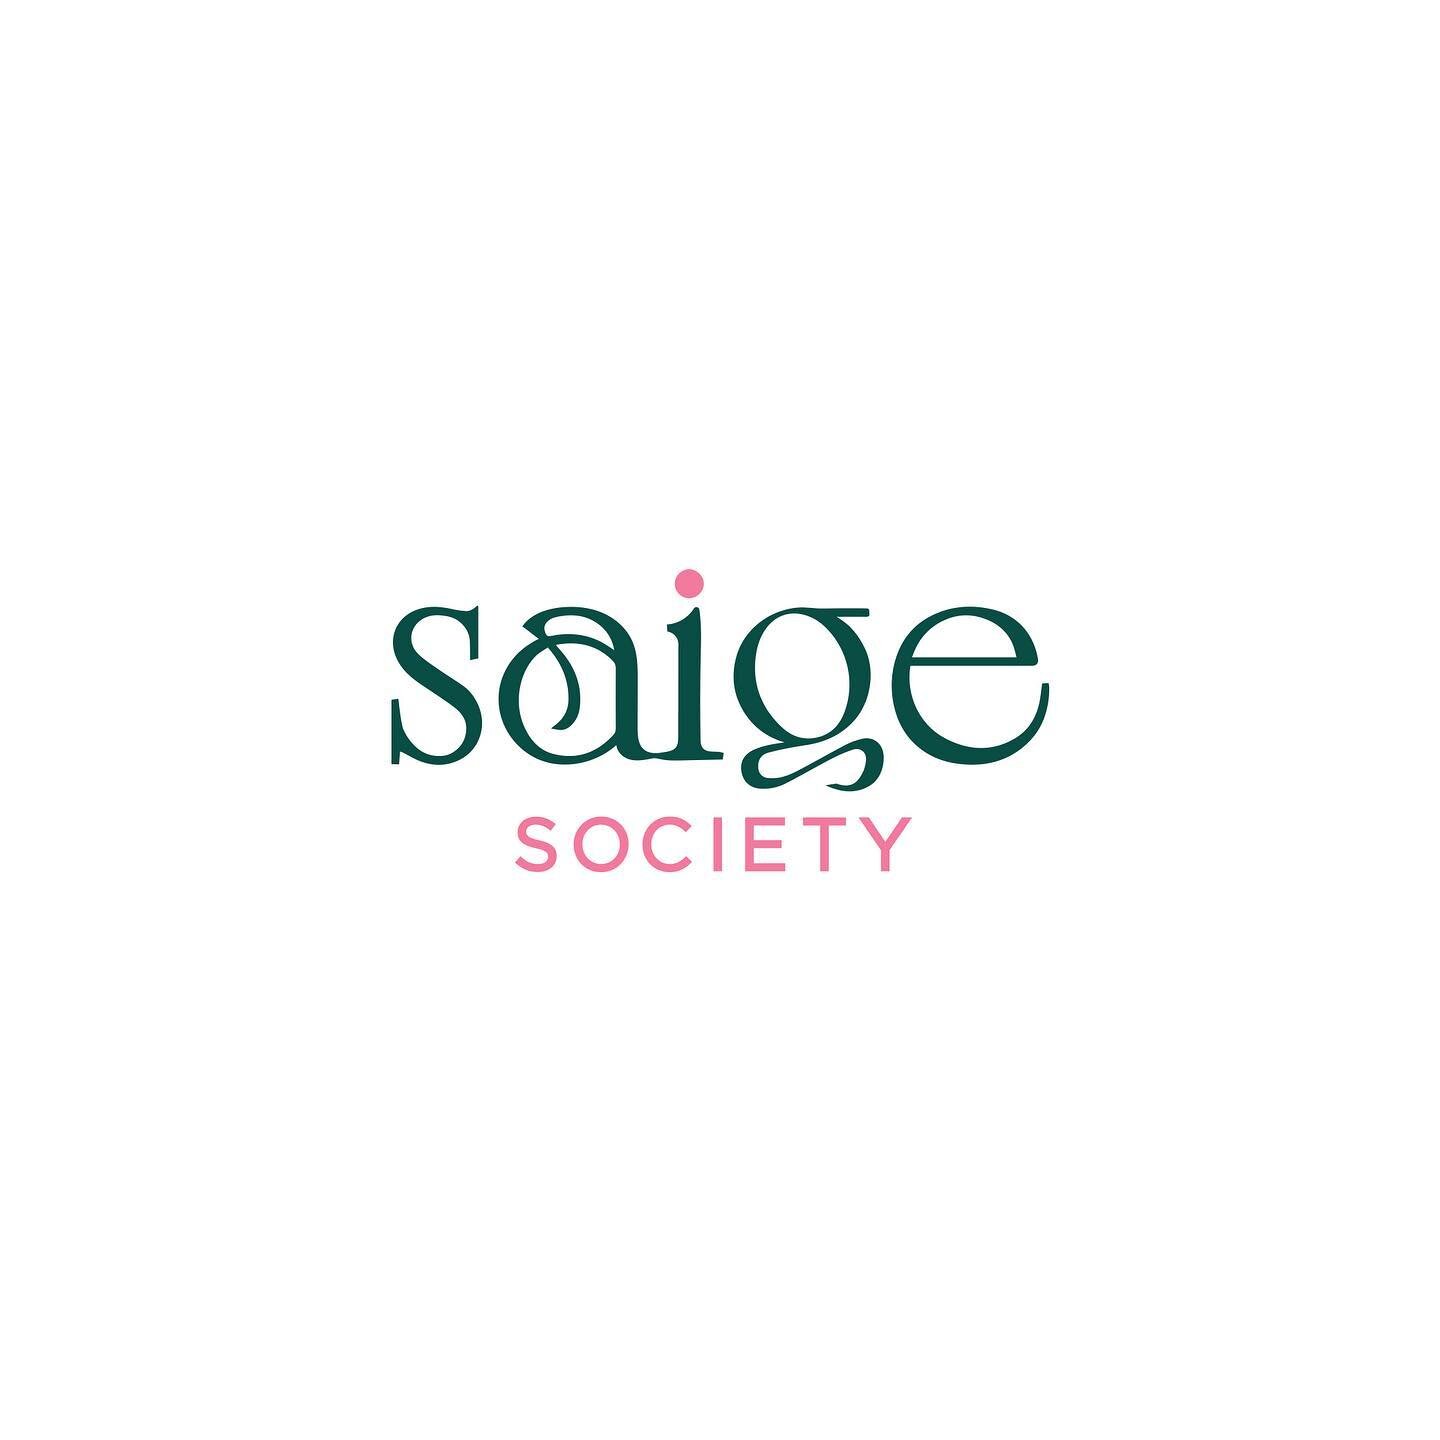 The wait is over!
Introducing SAIGE SOCIETY! 👏 🎉

As most of you will know, we have outgrown our beautiful space at Maiden Boutique and have been looking to expand for quite some time now.

I am excited to announce that finally, the day is here!
I 